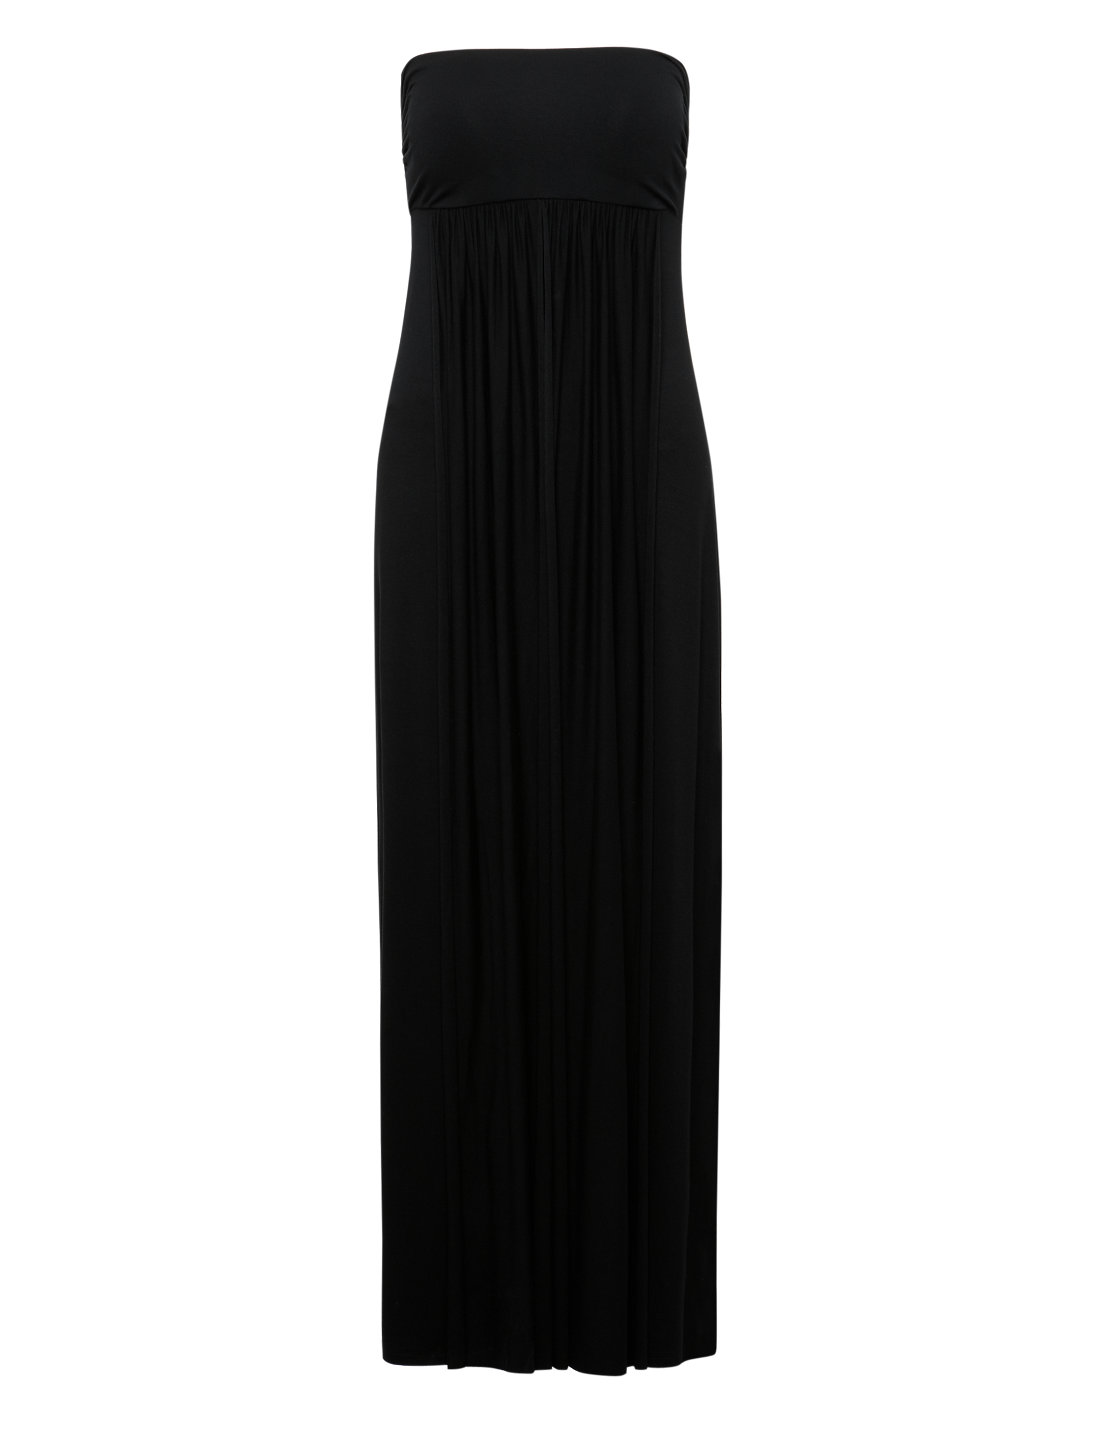 Marks and Spencer - - M&5 BLACK Multiway Jersey Maxi Dress - Size 8 to 18